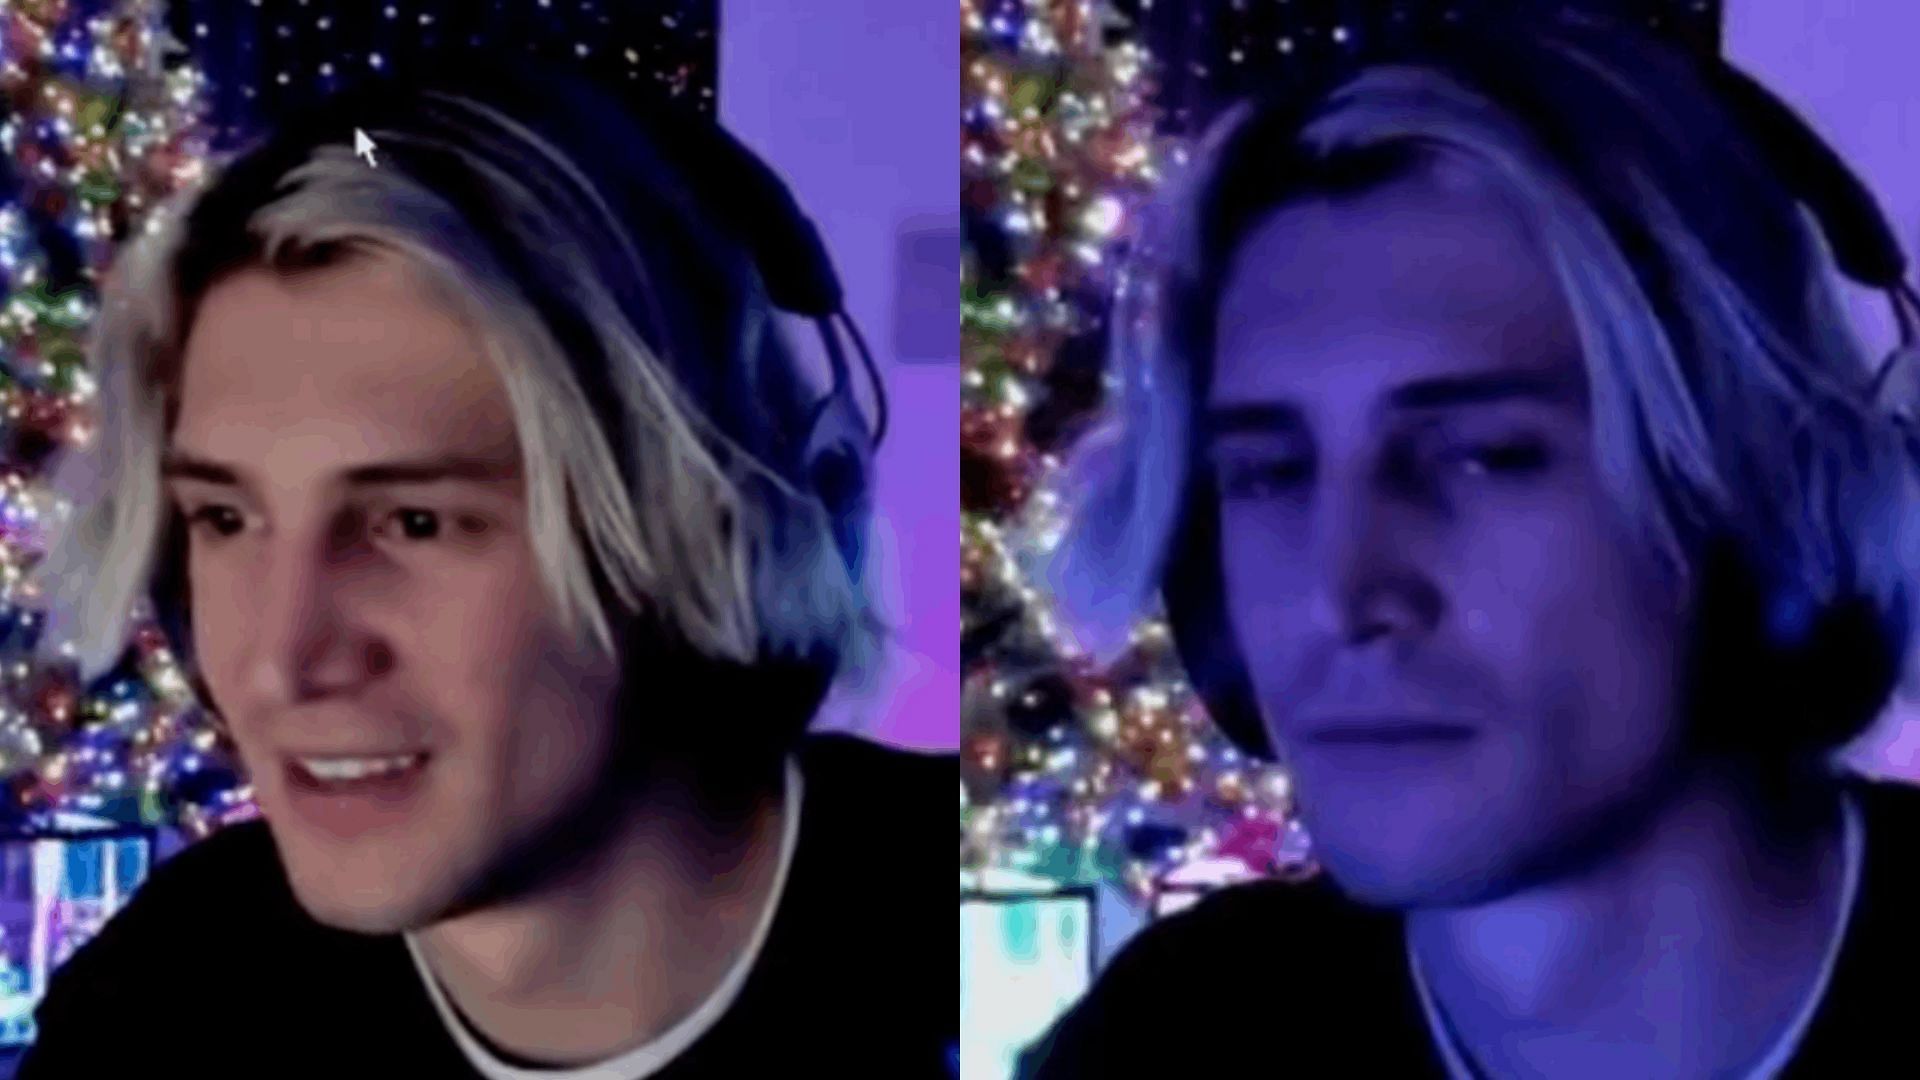 xQc before and after getting roasted by the woman on Monkey. (Image via xQc/Twitch)